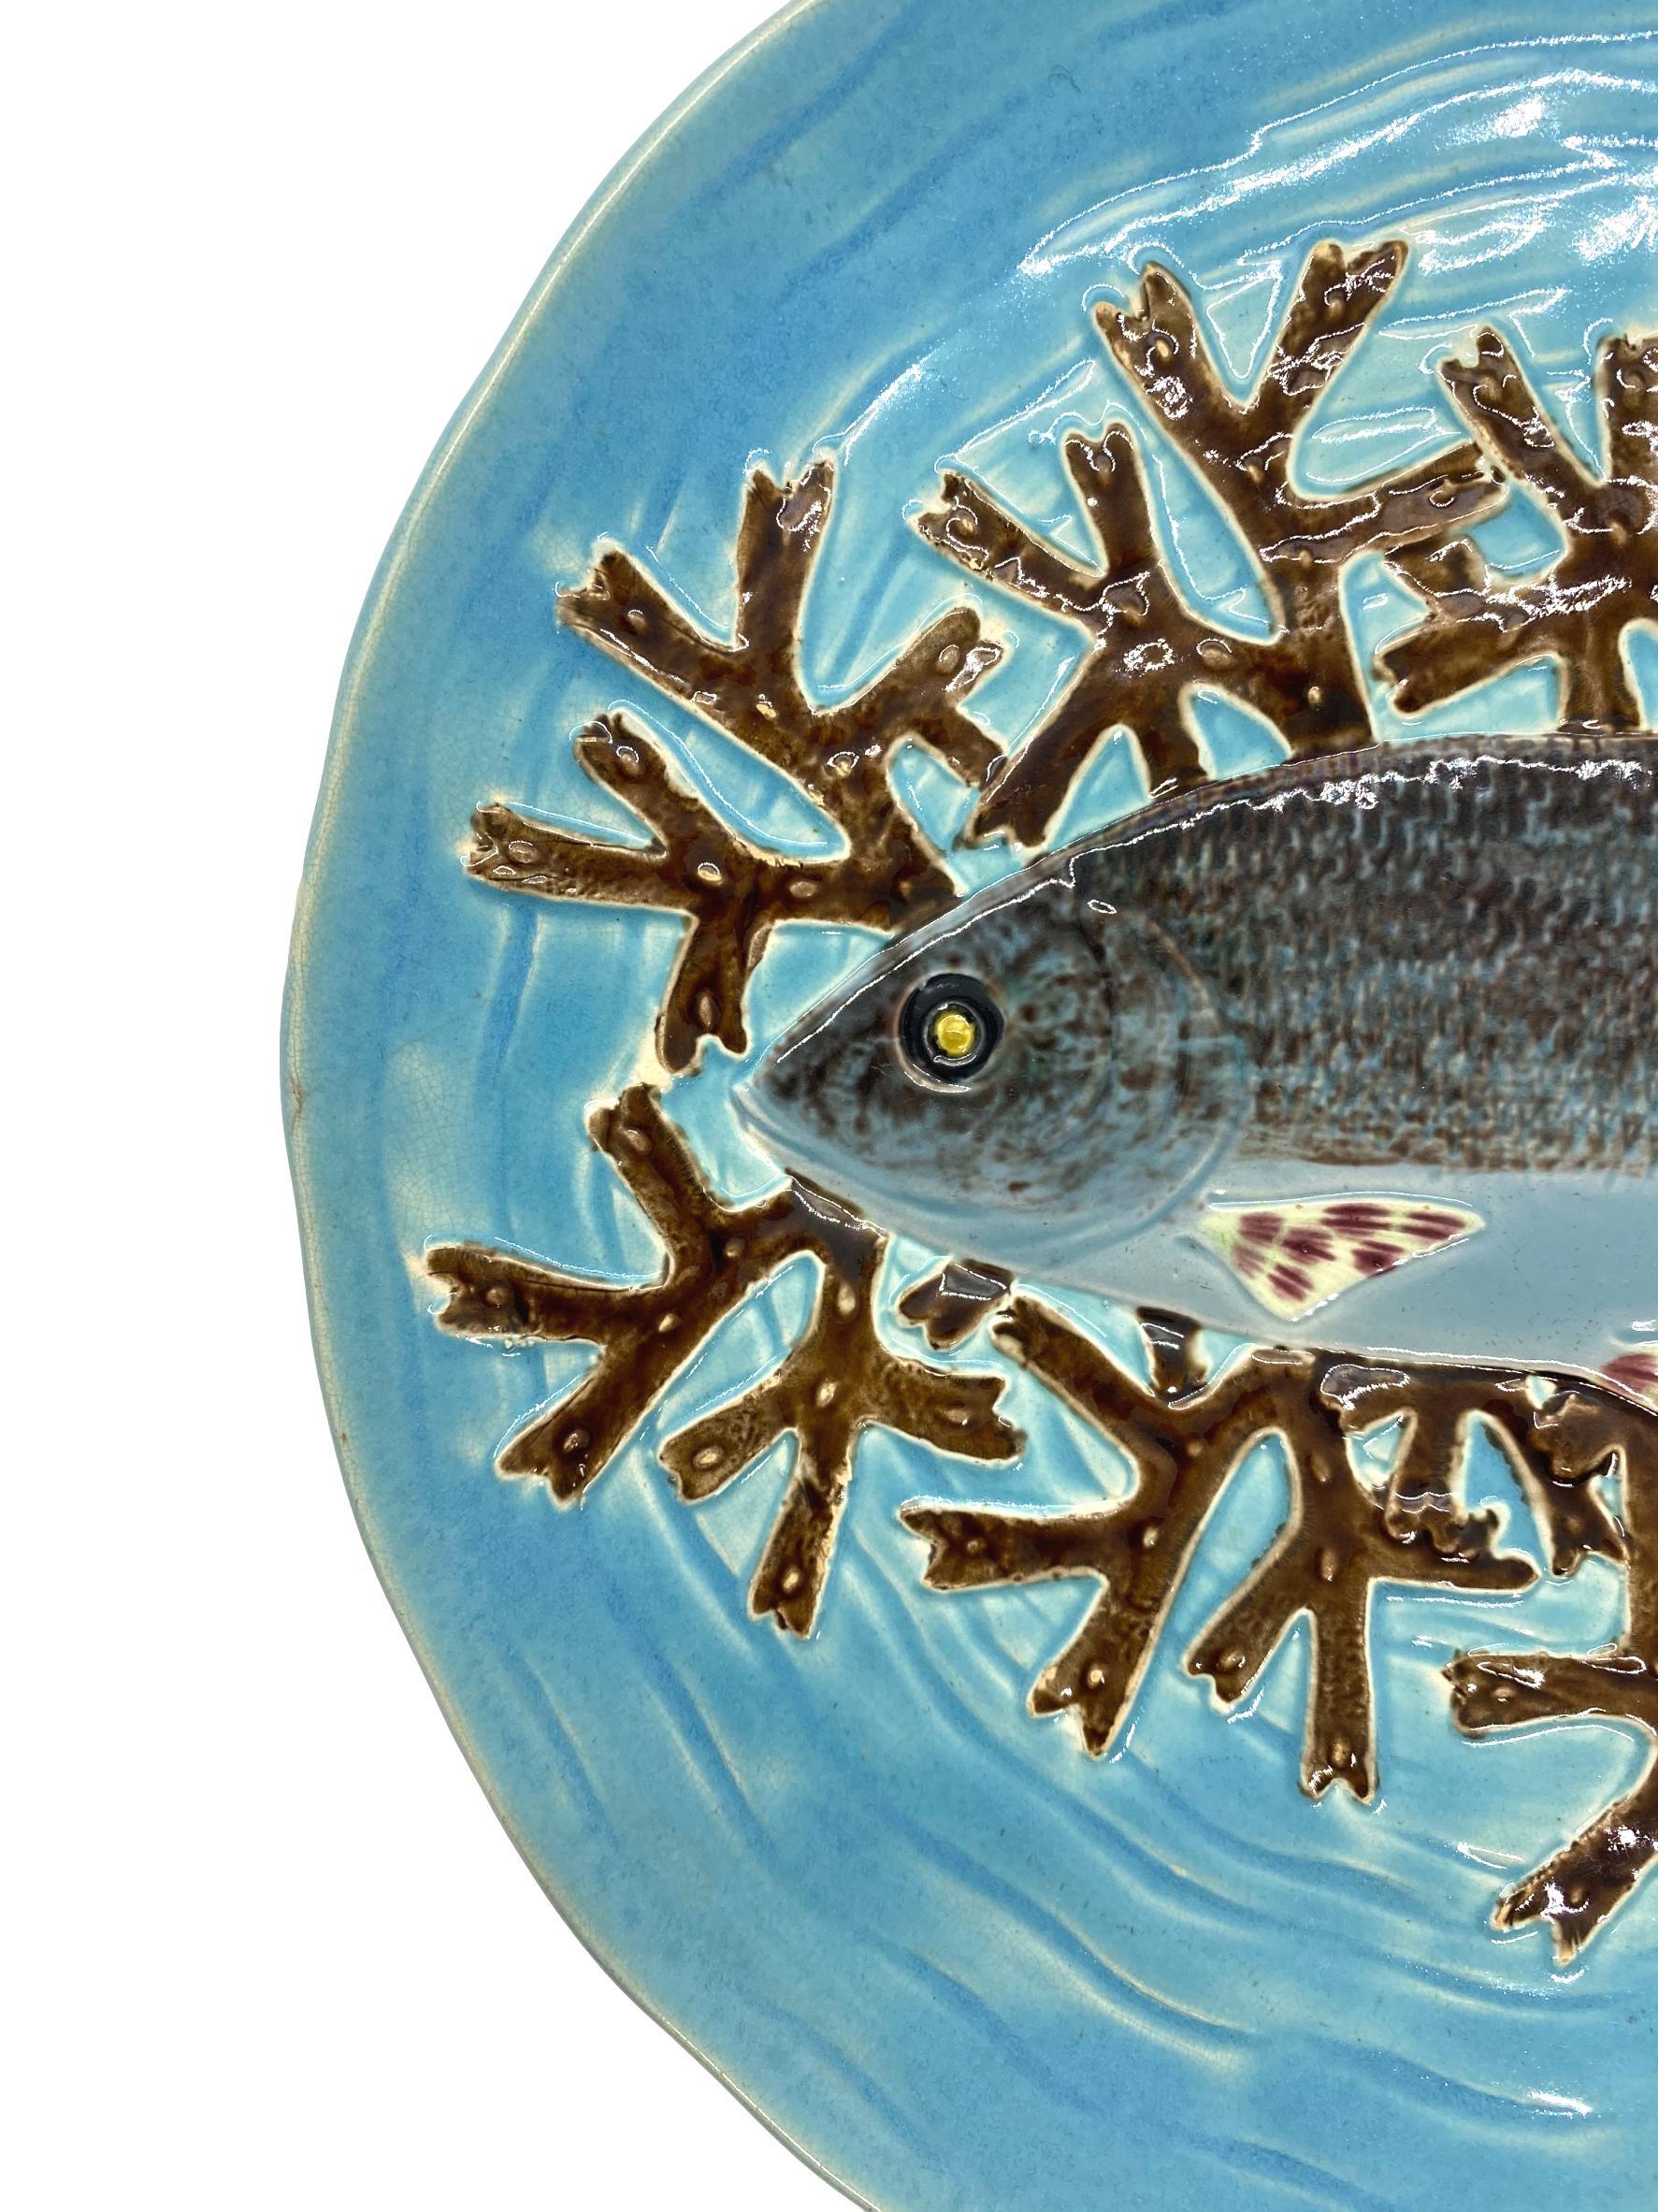 Joseph Holdcroft Majolica Trompe L'oeil Salmon Plate, naturalistically molded with a life-like salmon on a bed of red seaweed, on a relief molded basket-weave turquoise ground; the reverse with impressed mark,
'J HOLDCROFT.' 
For 30 years, we have